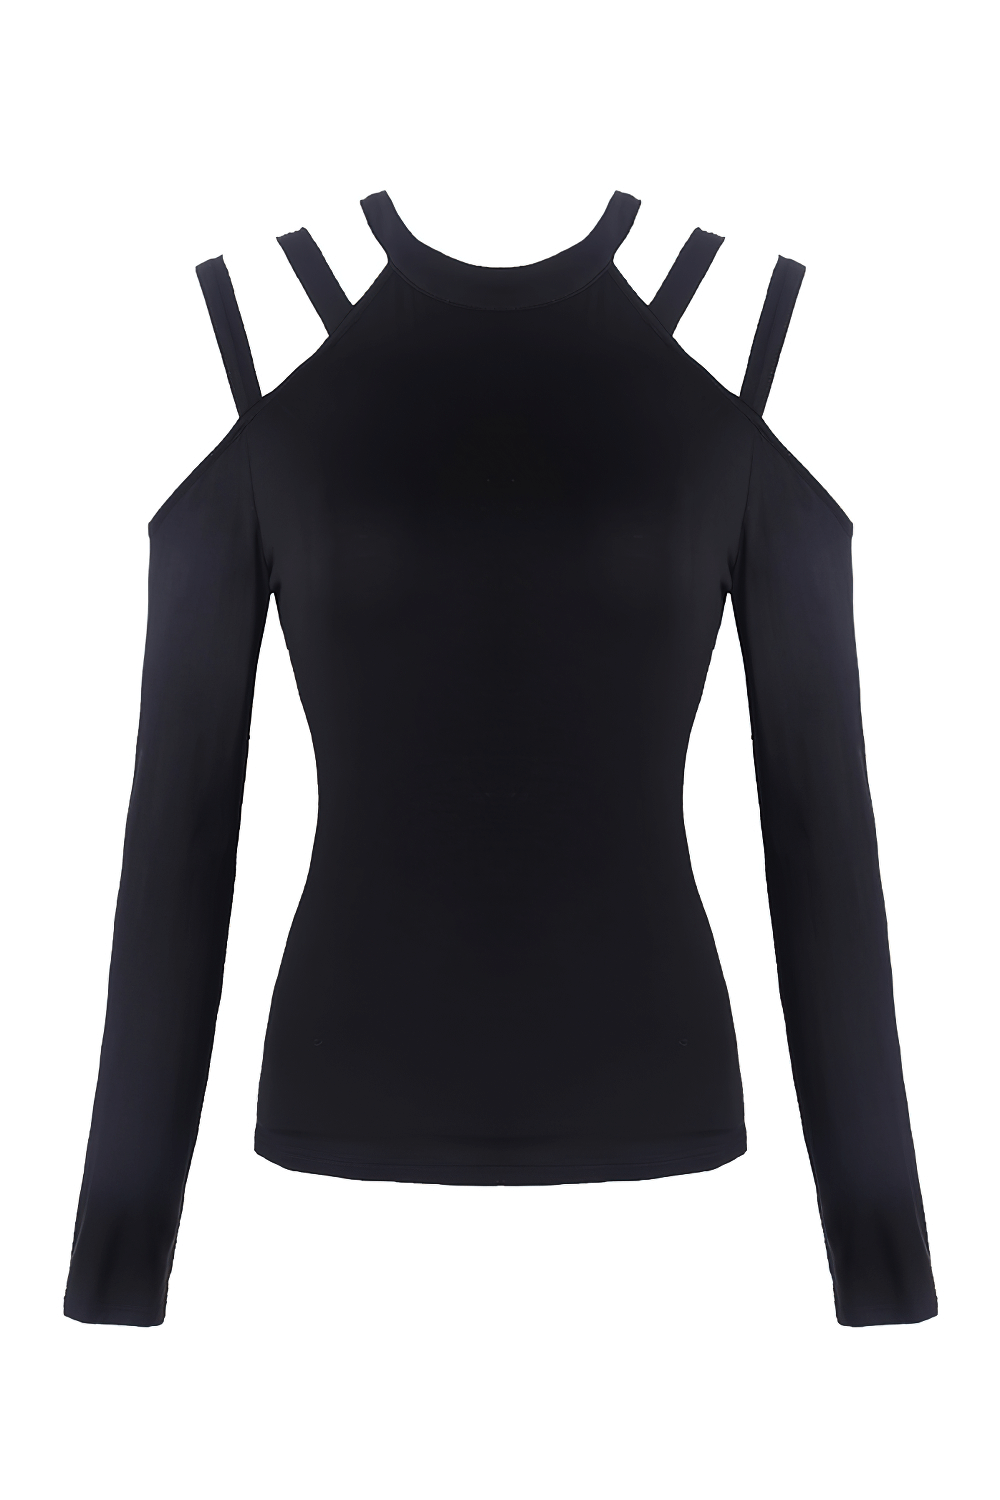 Punk Women's Long Sleeves Top with Cut Out Shoulder Straps